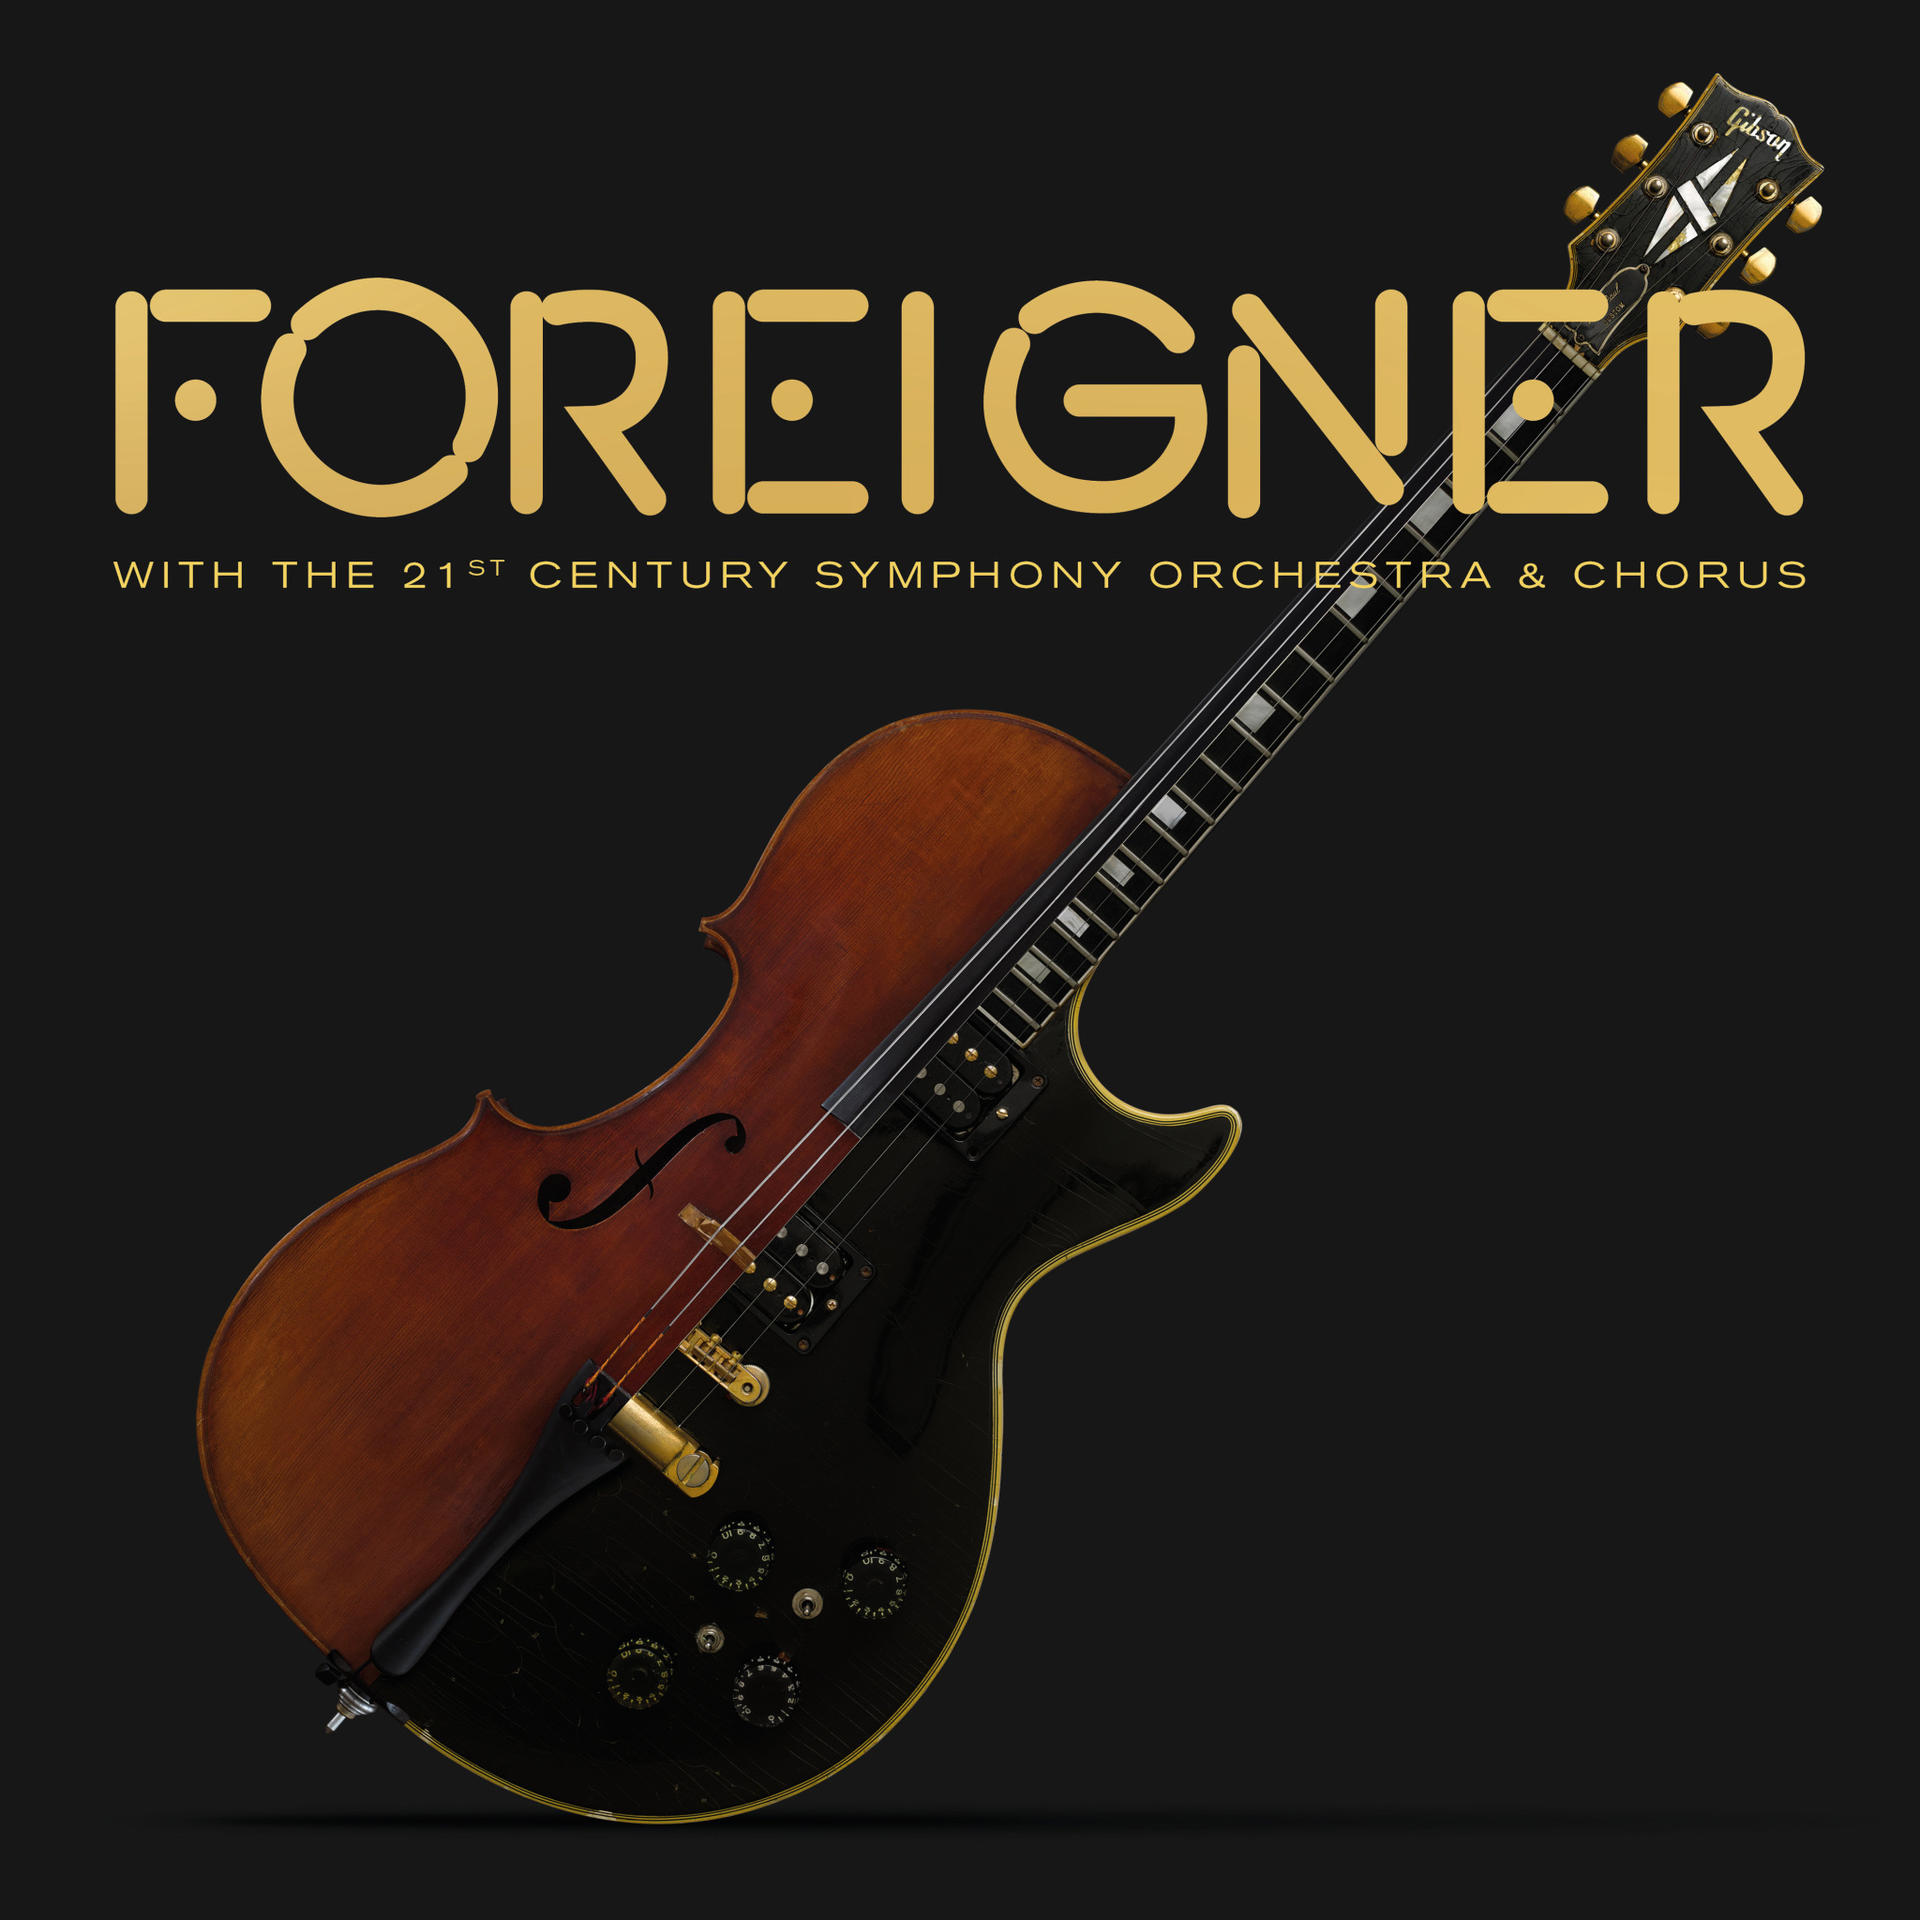 Foreigner - With Century Orchestra (Vinyl) Chorus 21st - & The Symphony